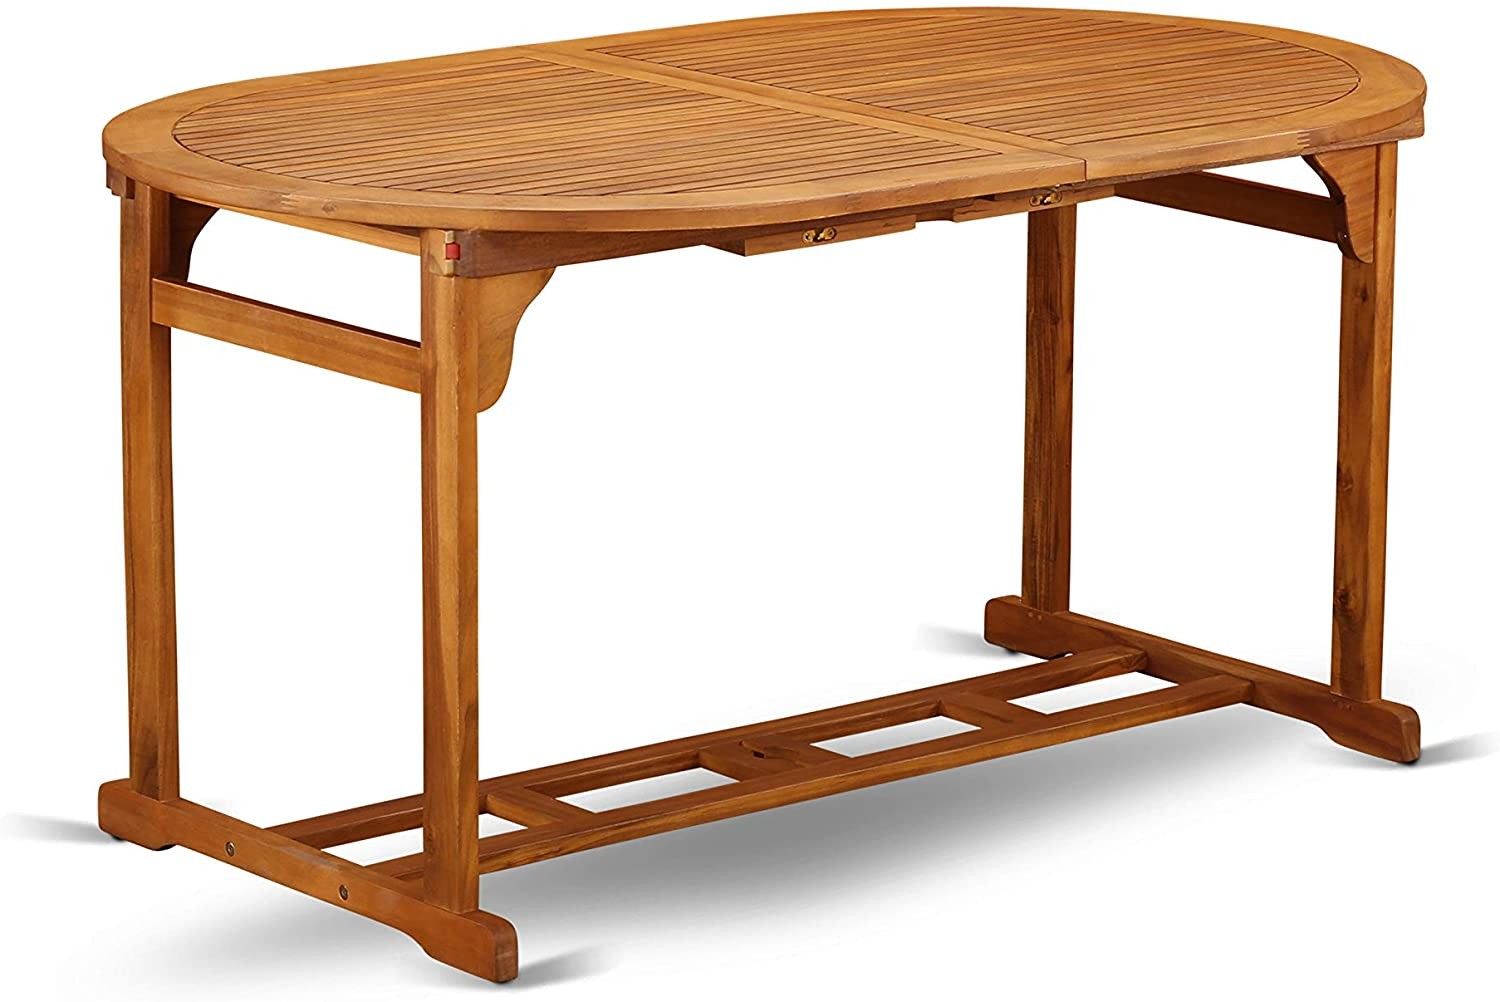 Extremely Durable Dining Table